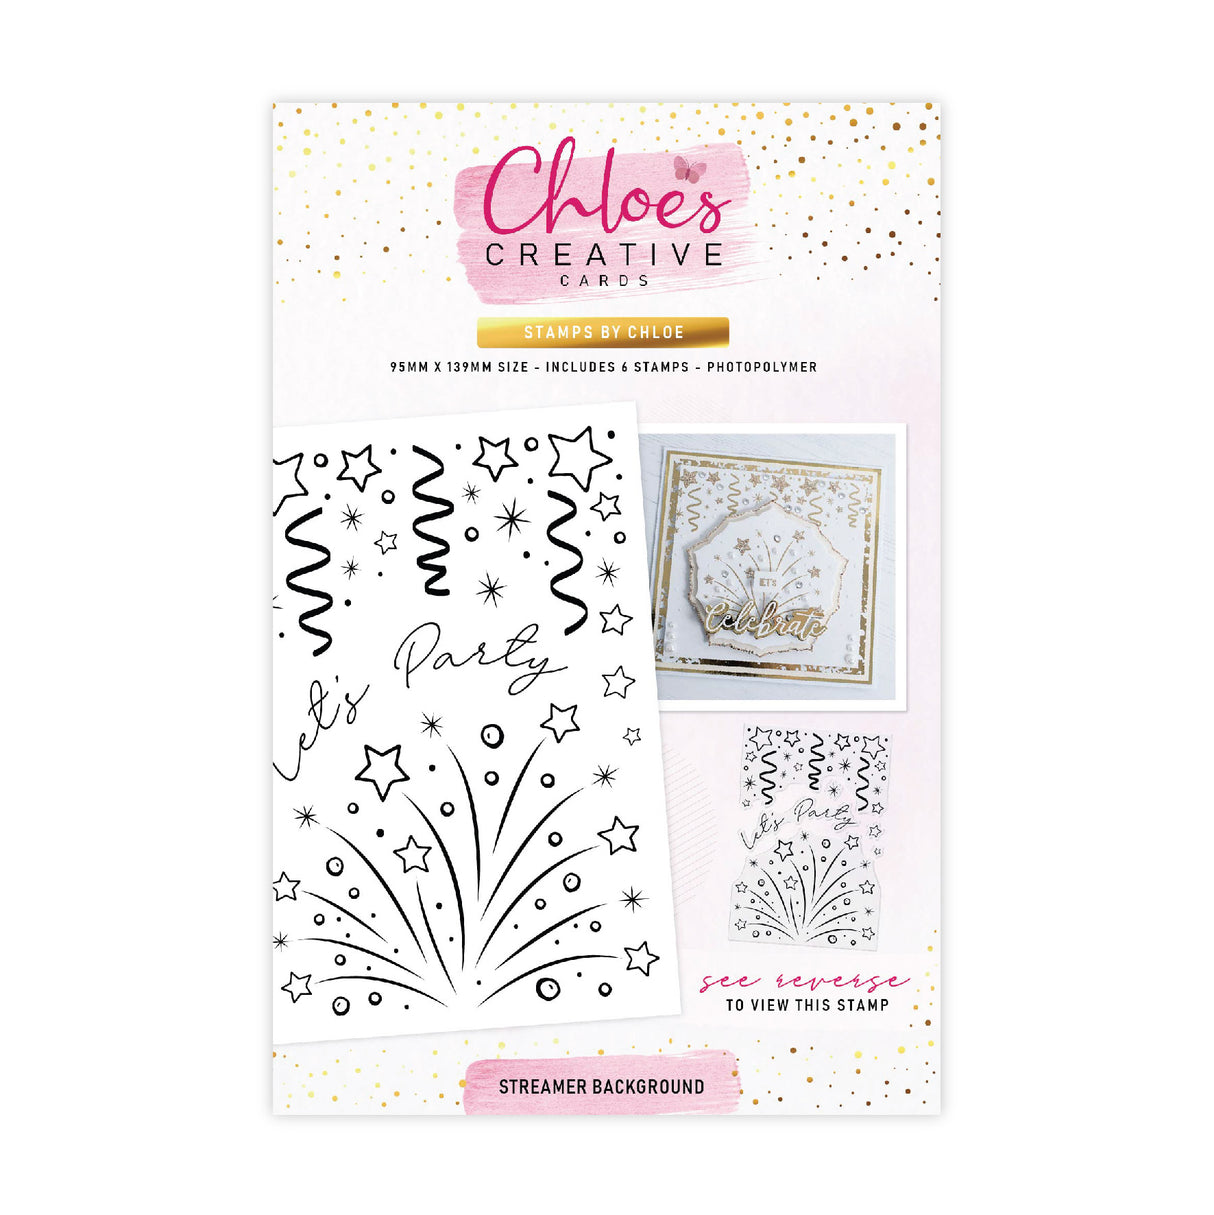 Chloes Creative Cards Photopolymer Stamp Set (A6) - Streamer Background